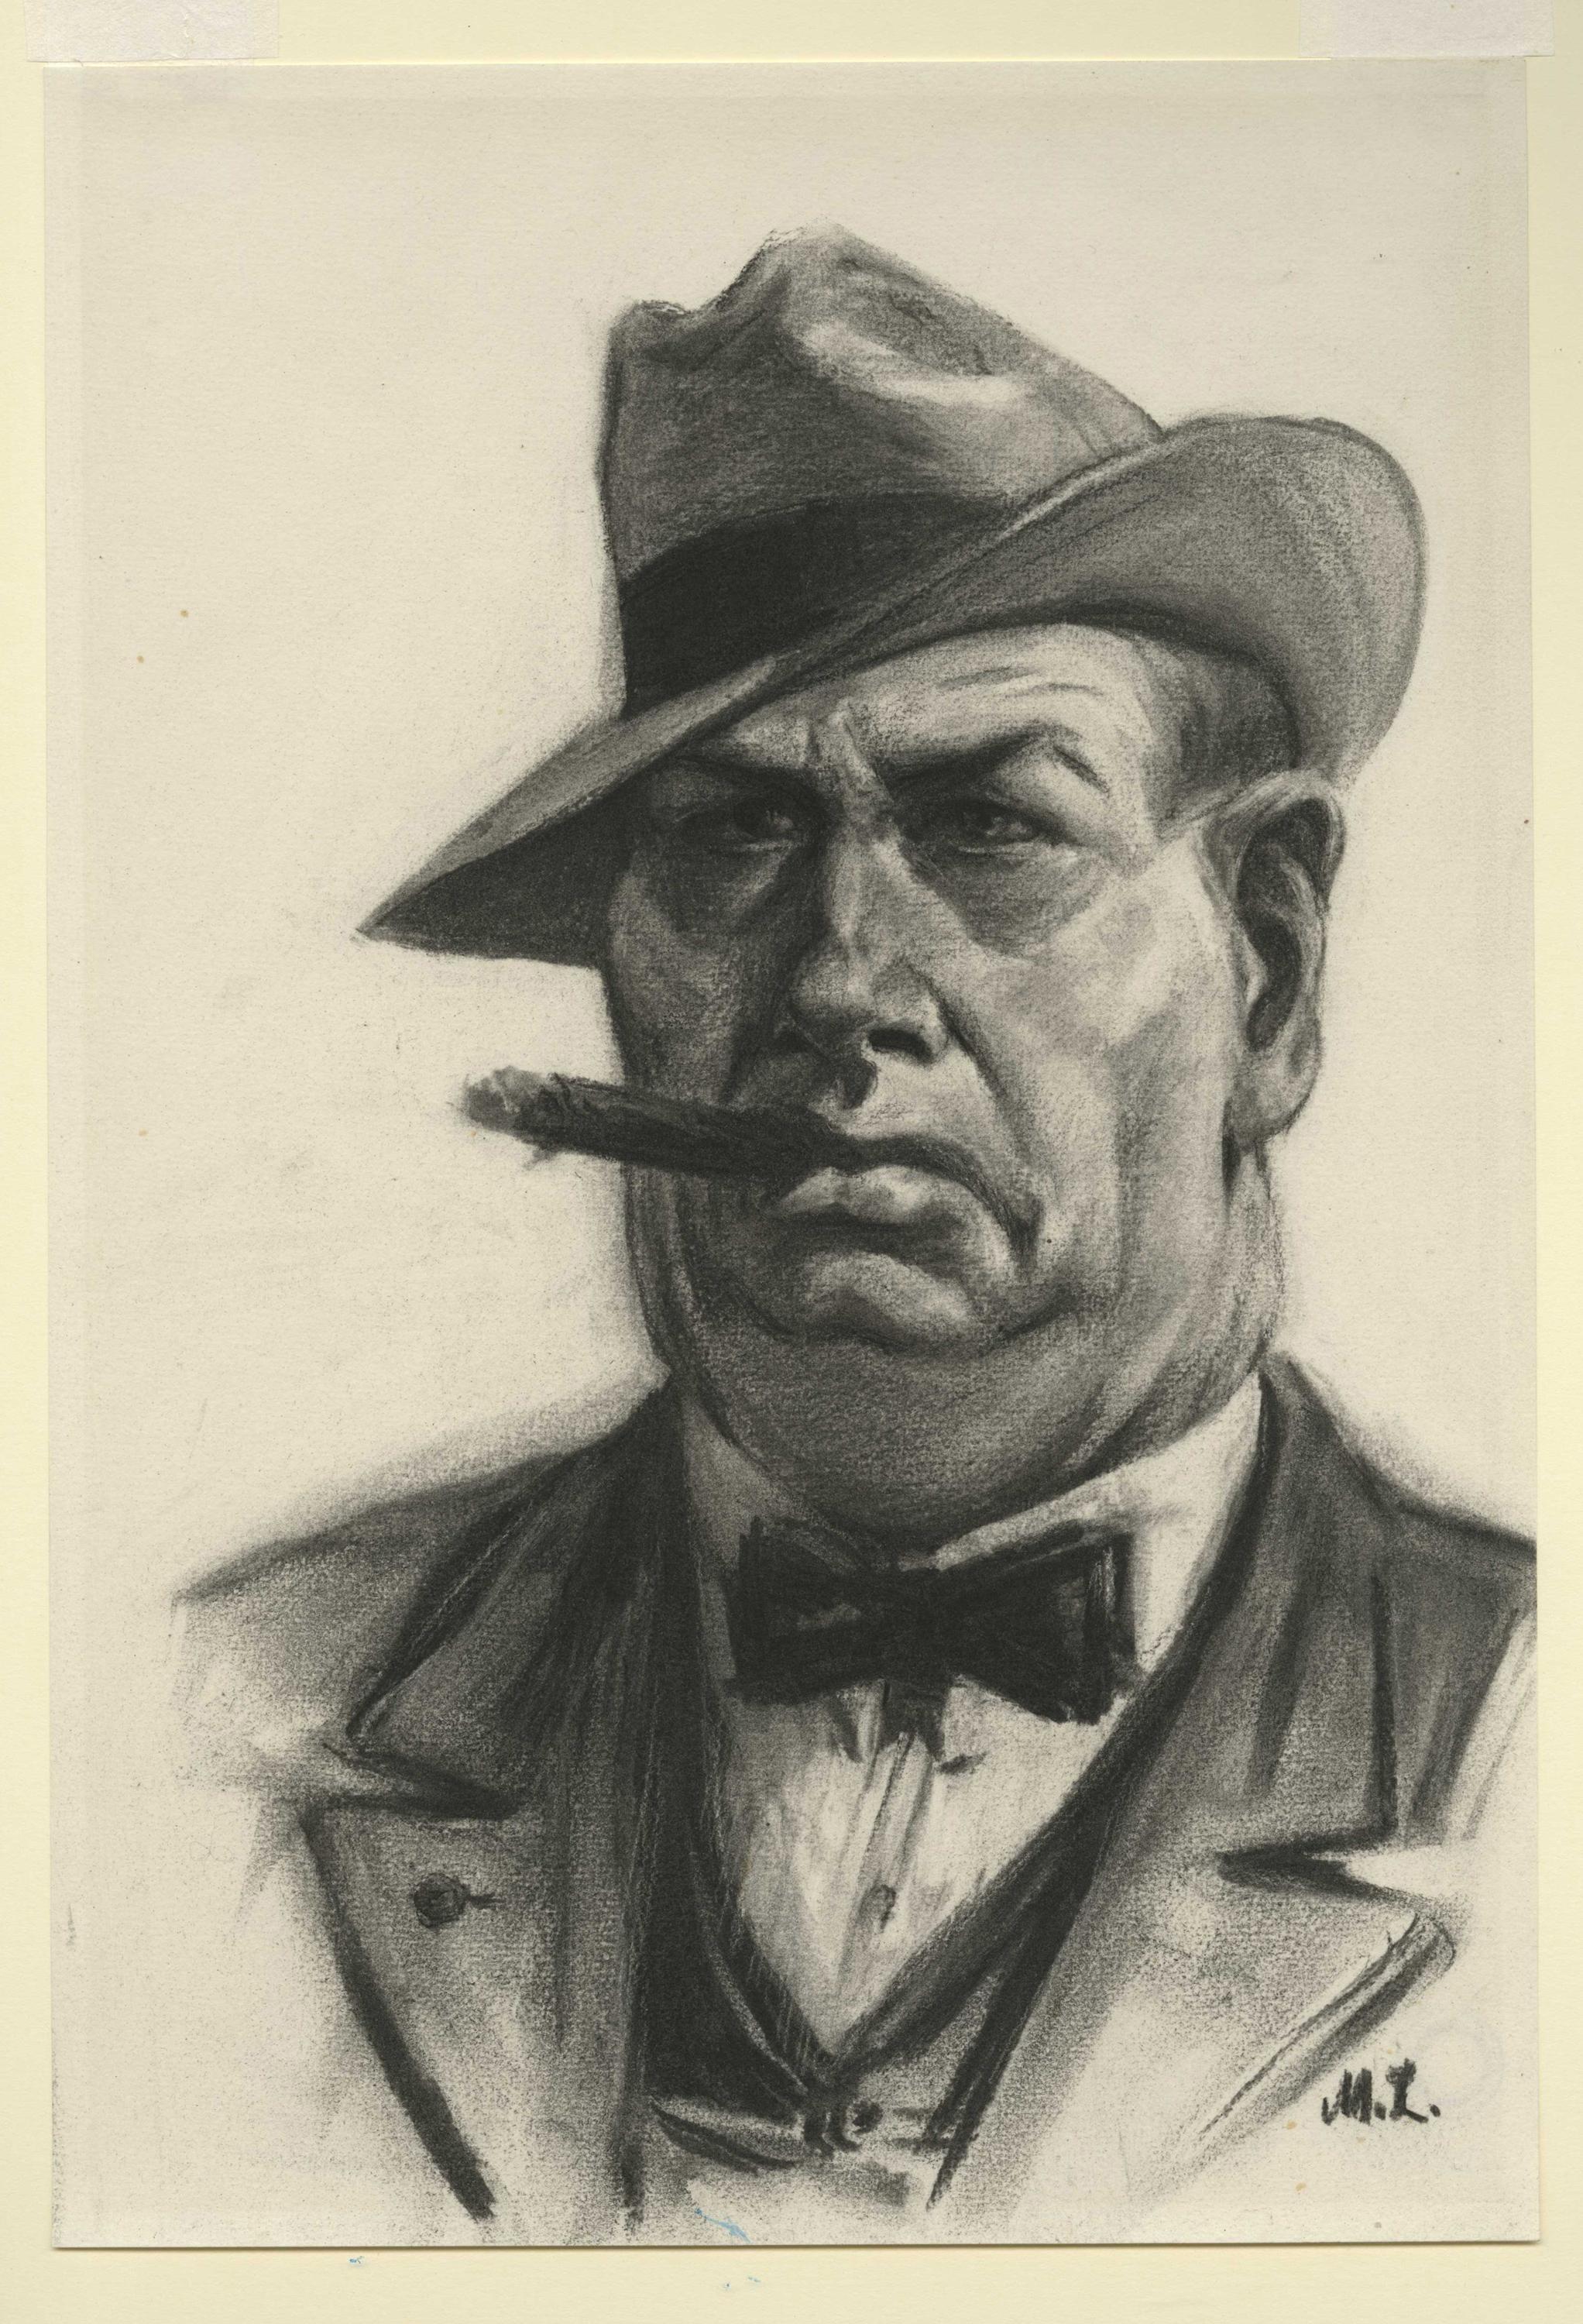 [Man with cigar] - Art by Martin Lewis